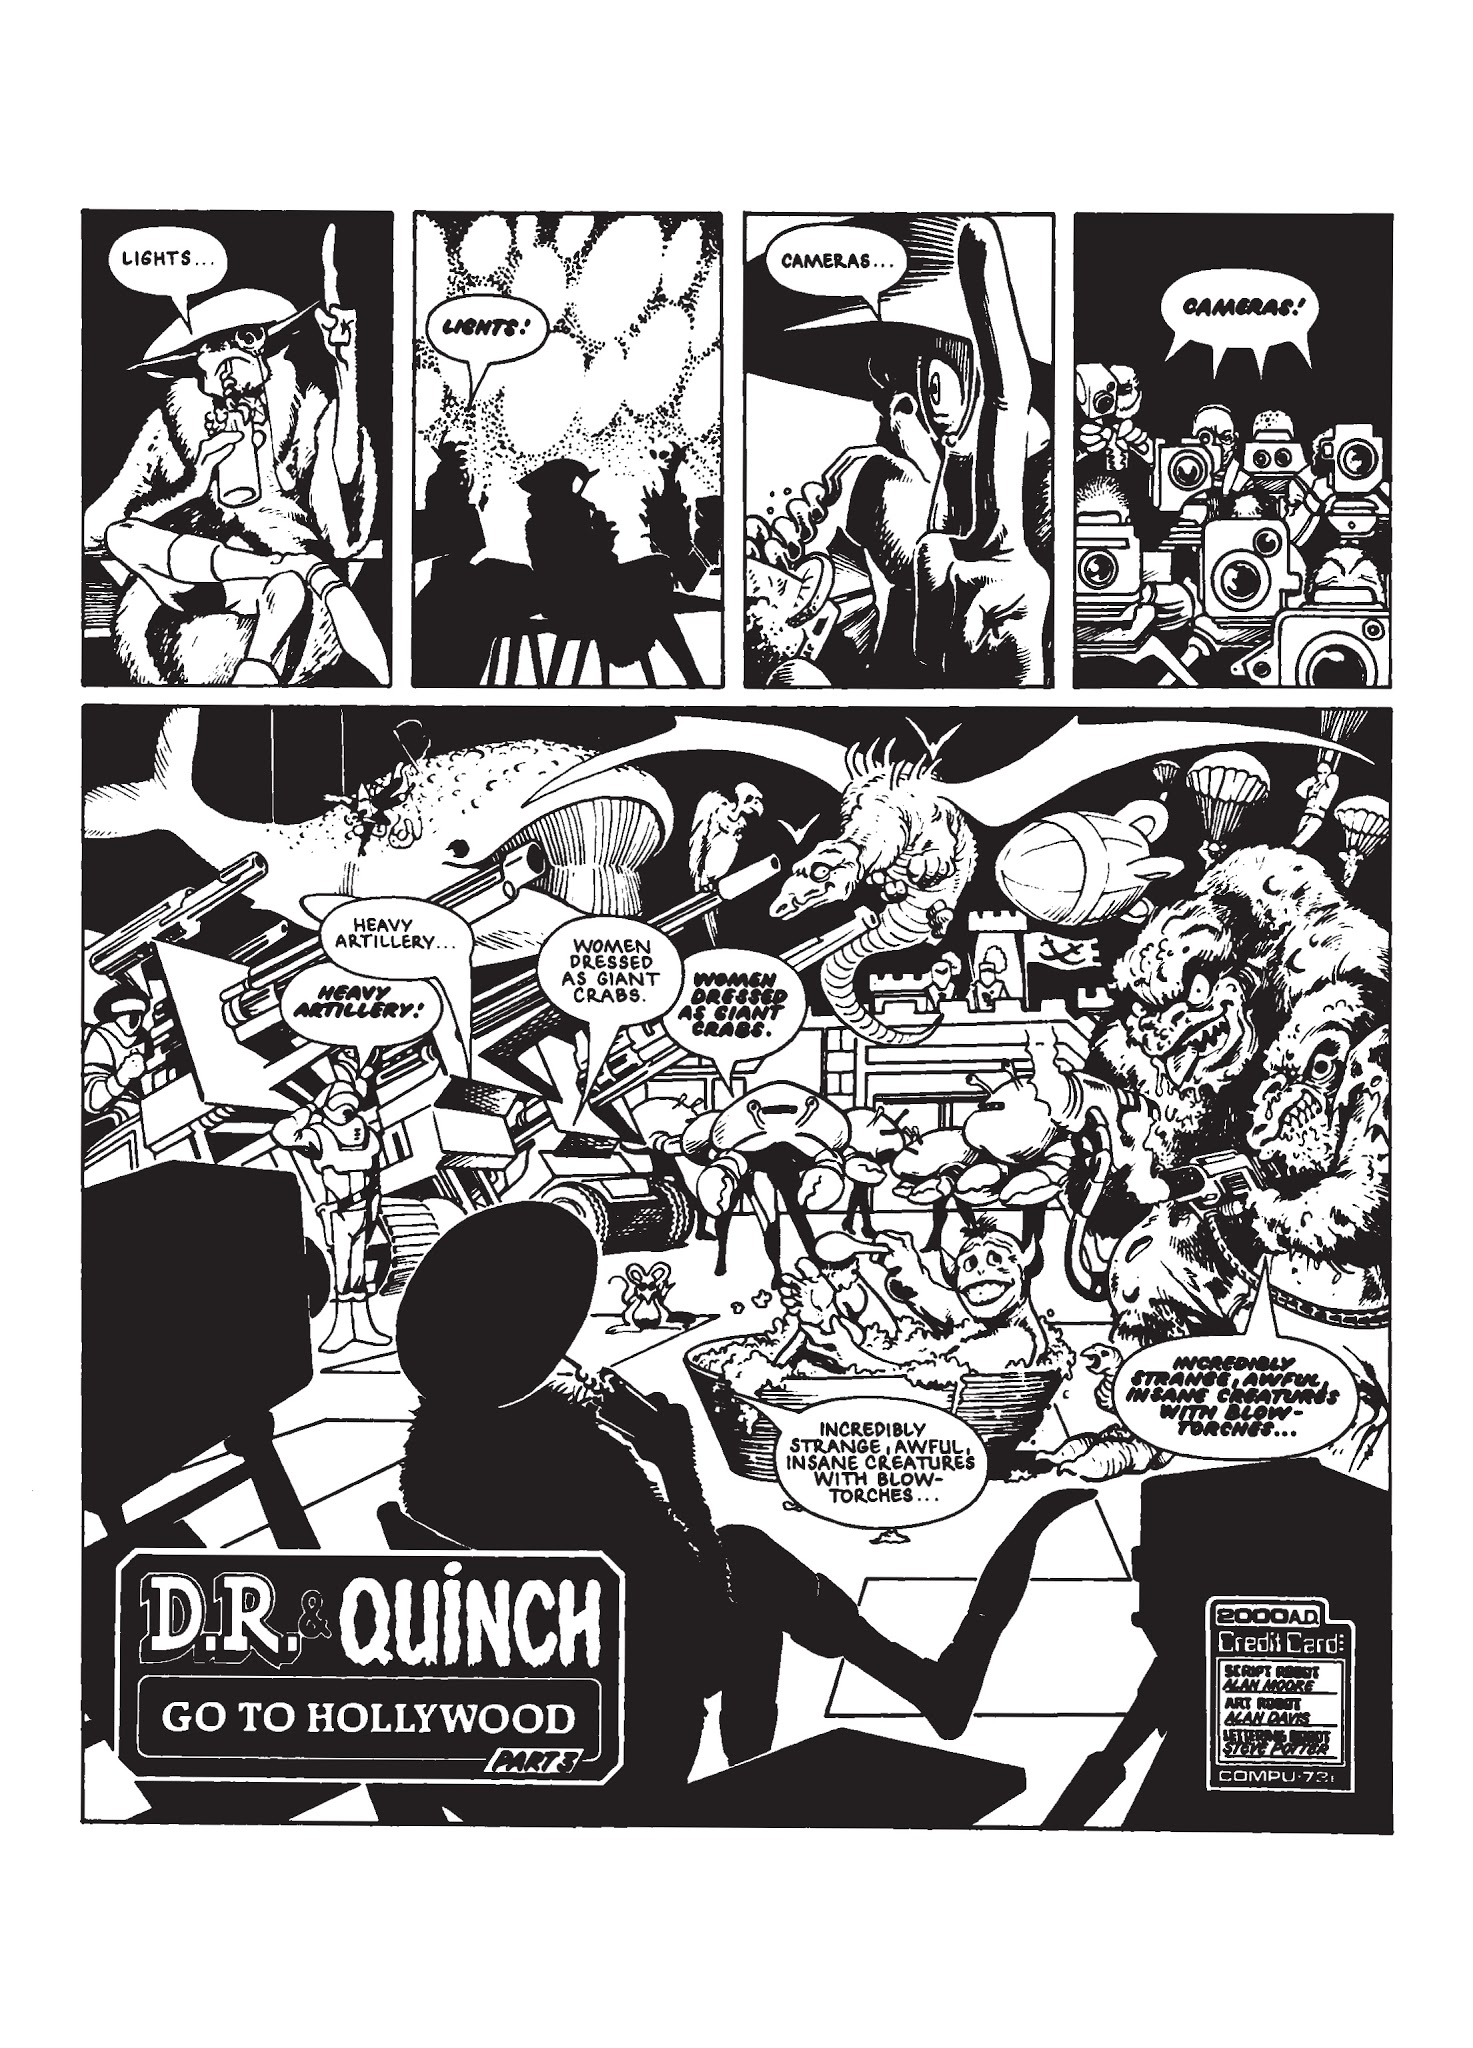 Read online The Complete D.R. & Quinch comic -  Issue # TPB - 82